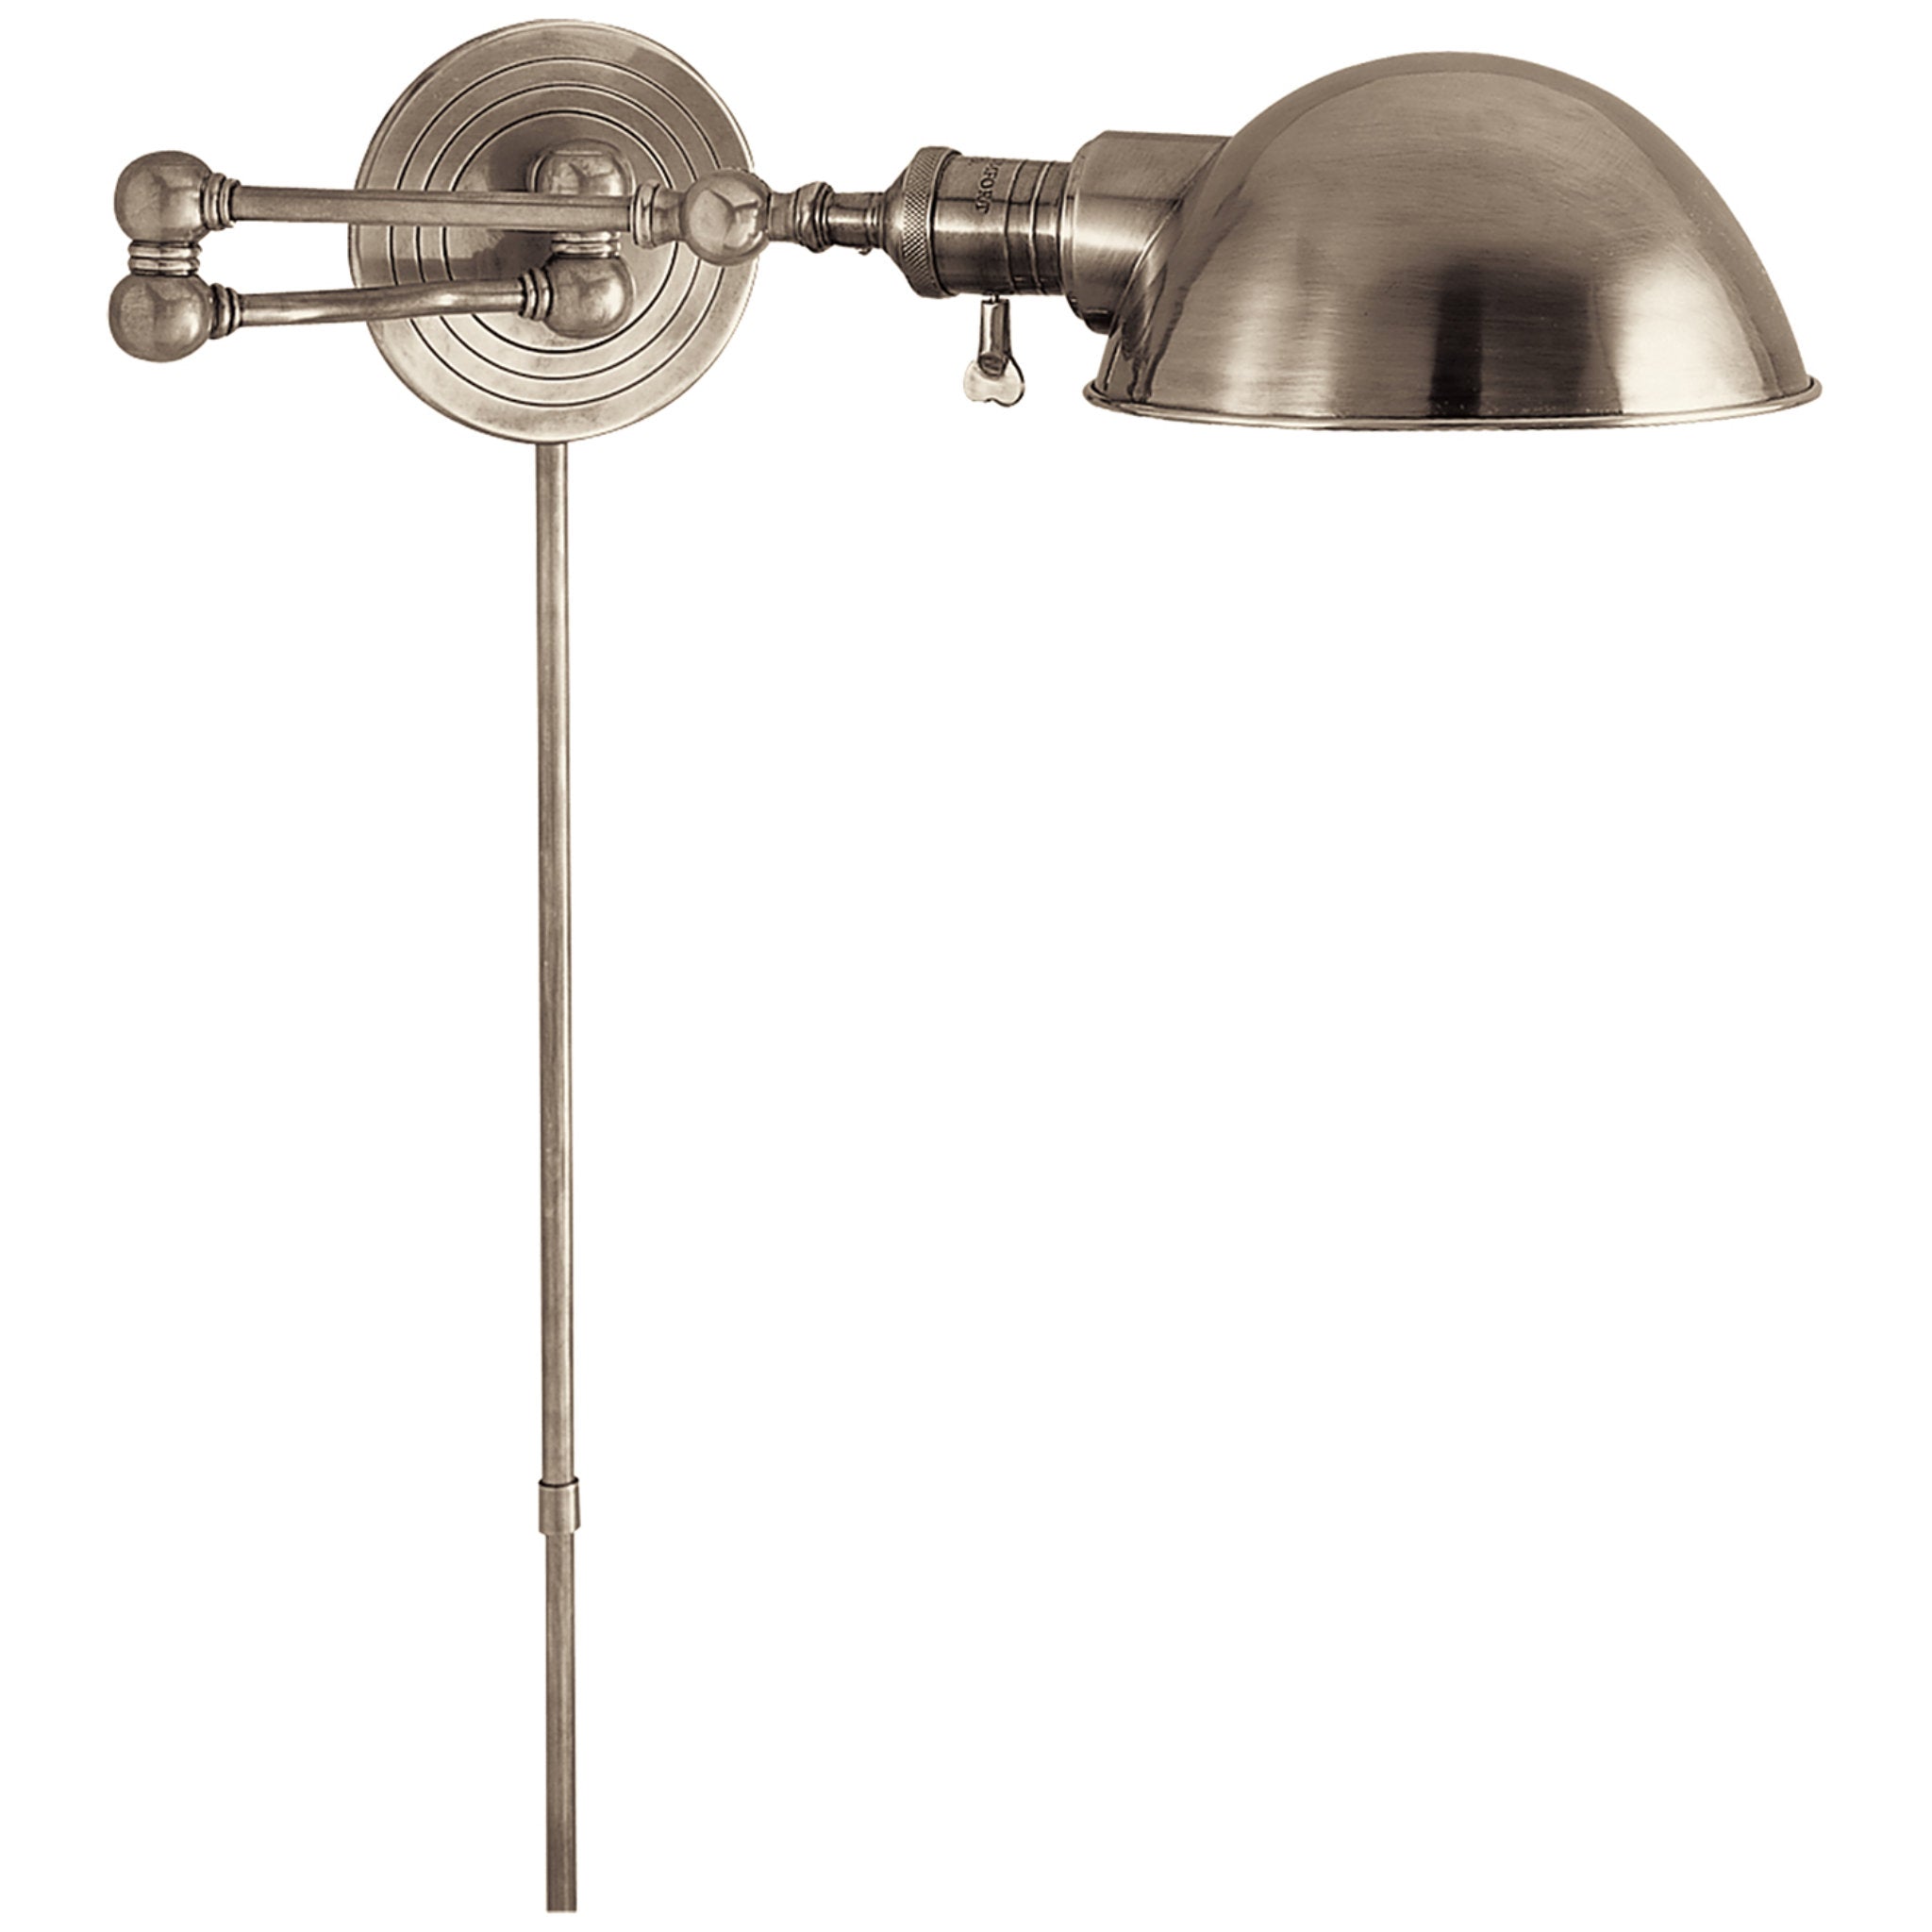 Chapman & Myers Boston Swing Arm in Antique Nickel with SLG Shade